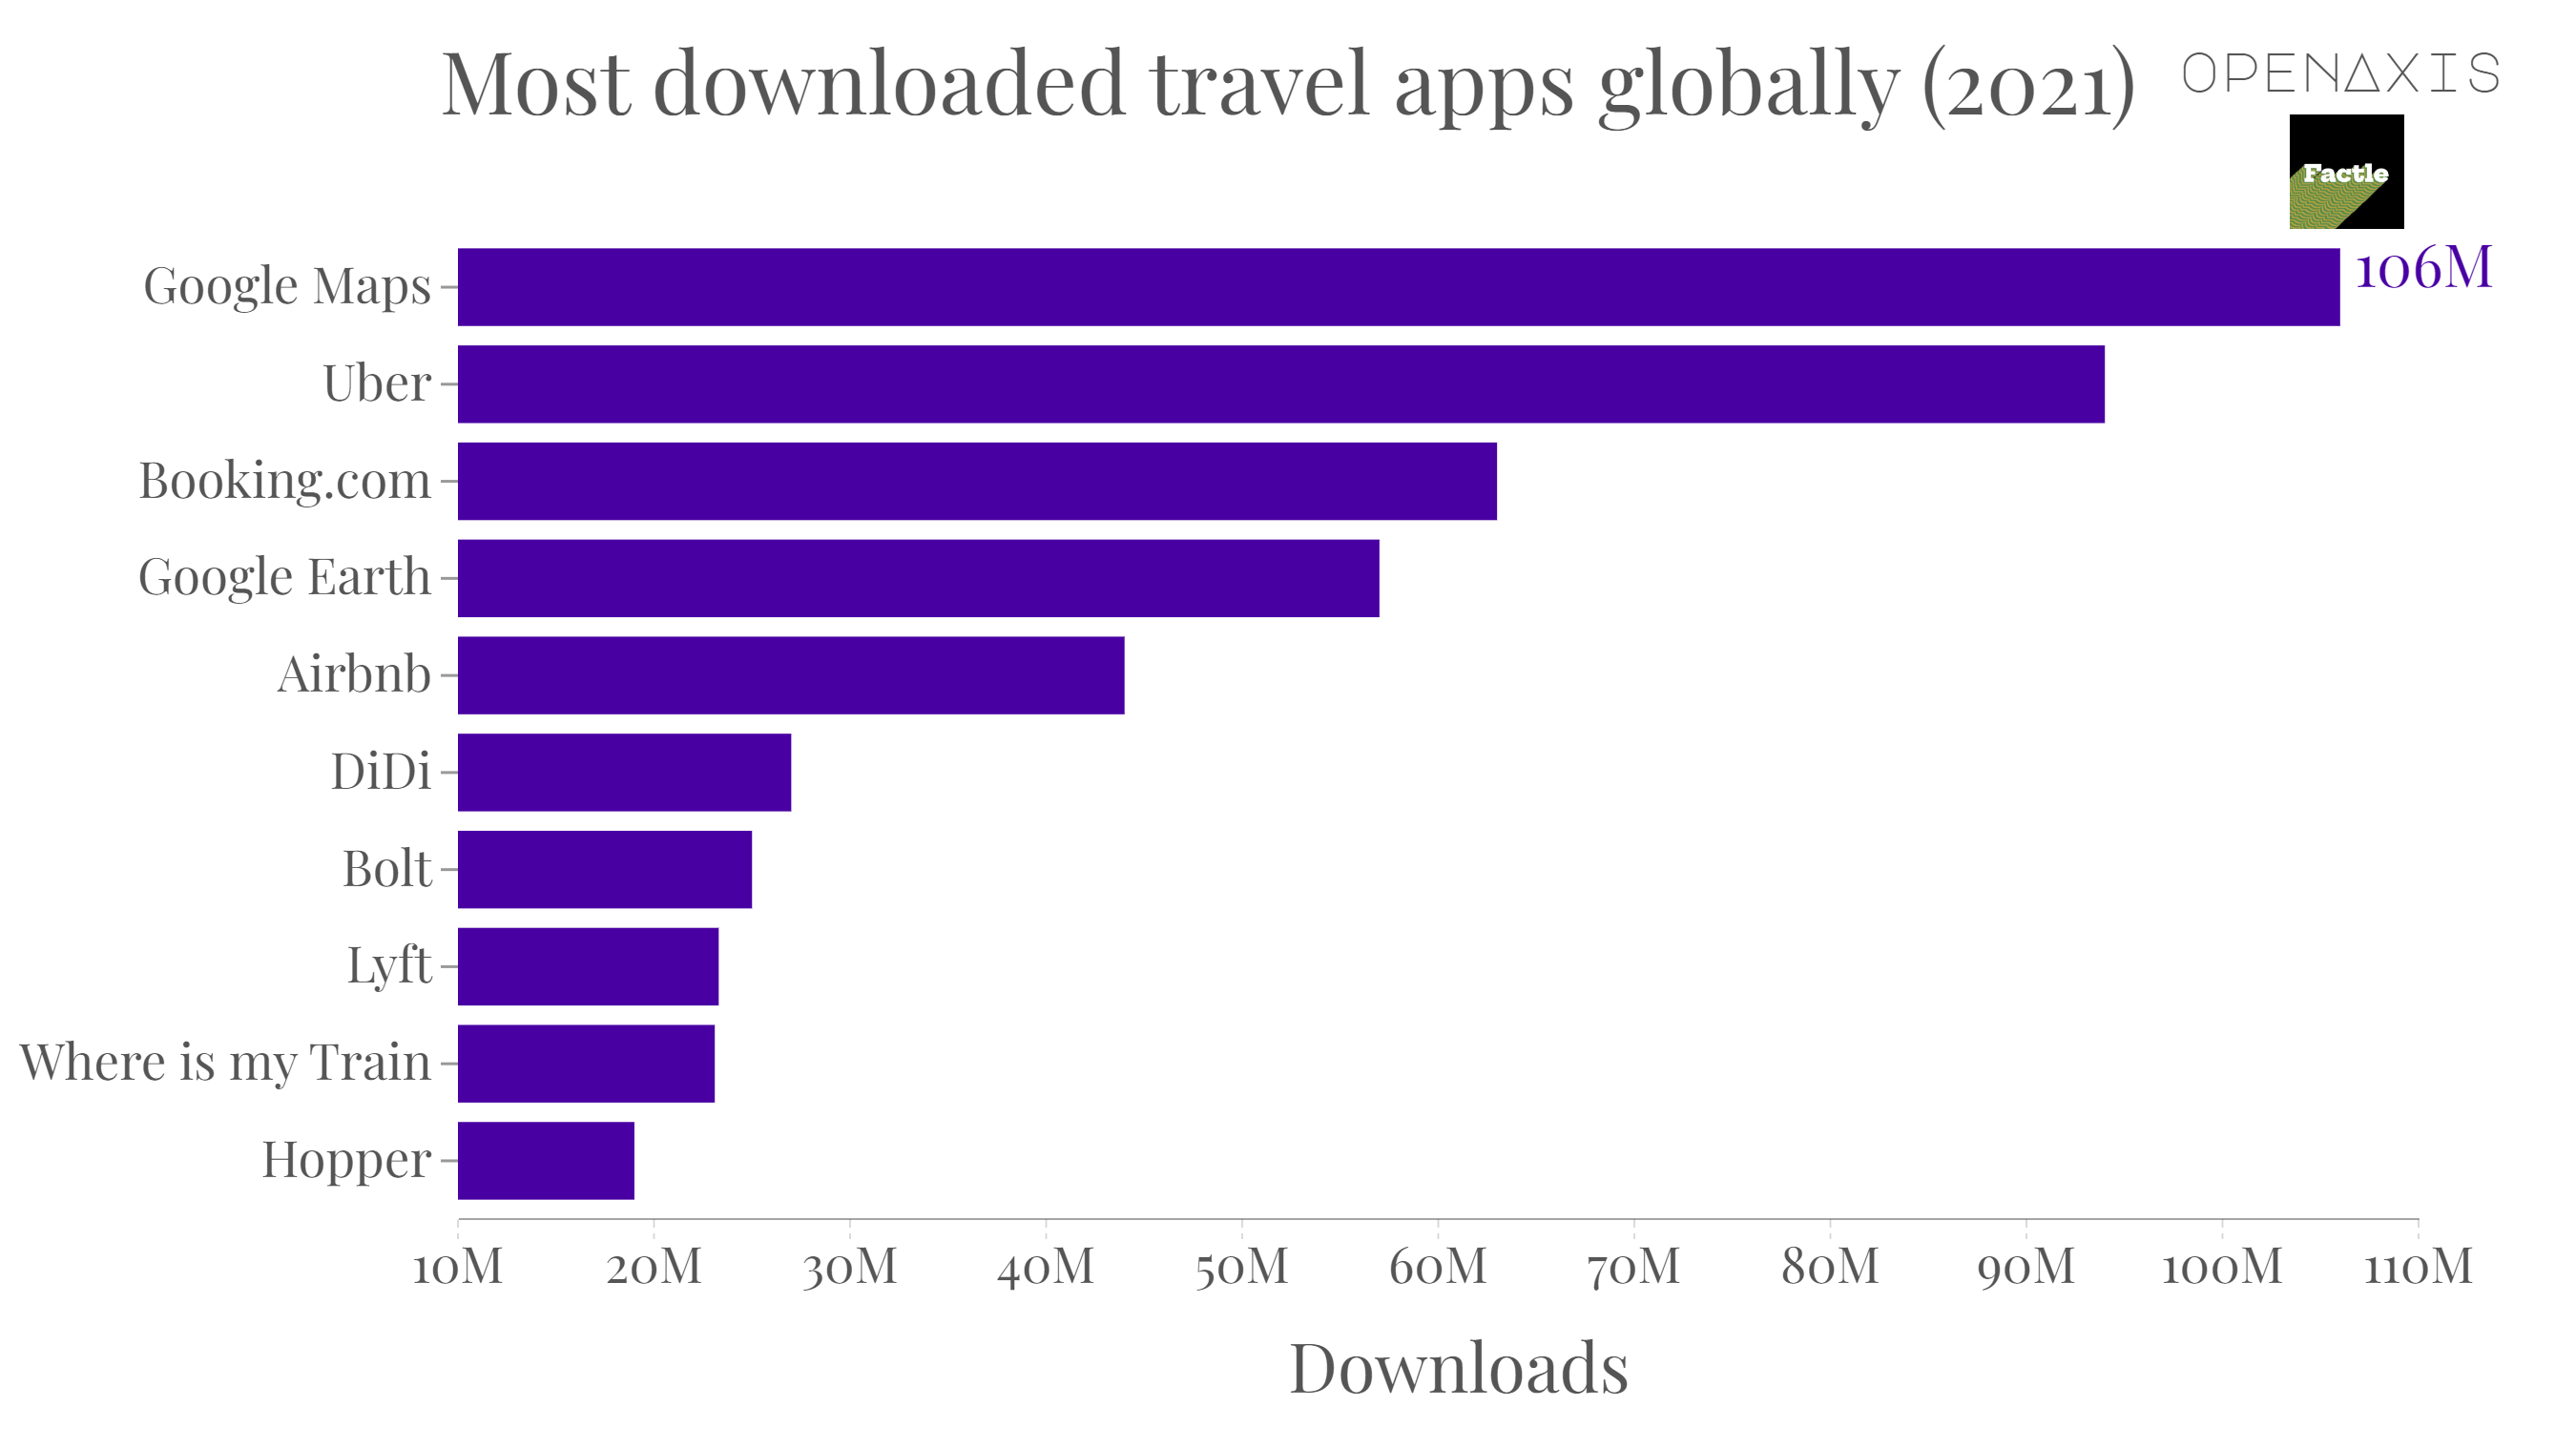 <p>Top 10 Travel/OTA apps downloaded worldwide in 2021. </p><p><br /></p><p>The top five apps actually encompass most stages of travel. </p><p><br /></p><p>Picture this:</p><p><br /></p><p>You search the world for a new travel destination on <strong>Google Earth</strong>. You purchase tickets on <strong>Booking.com</strong>, order an <strong>Uber </strong>to bring you to the airport, use <strong>Google Maps</strong> once you've arrived at your destination to take you to your housing at the <strong>Airbnb</strong> you reserved. </p><p><br /></p><p>Source: <a href="/data/3735" target="_blank">Apptopia</a></p><p><br /></p>